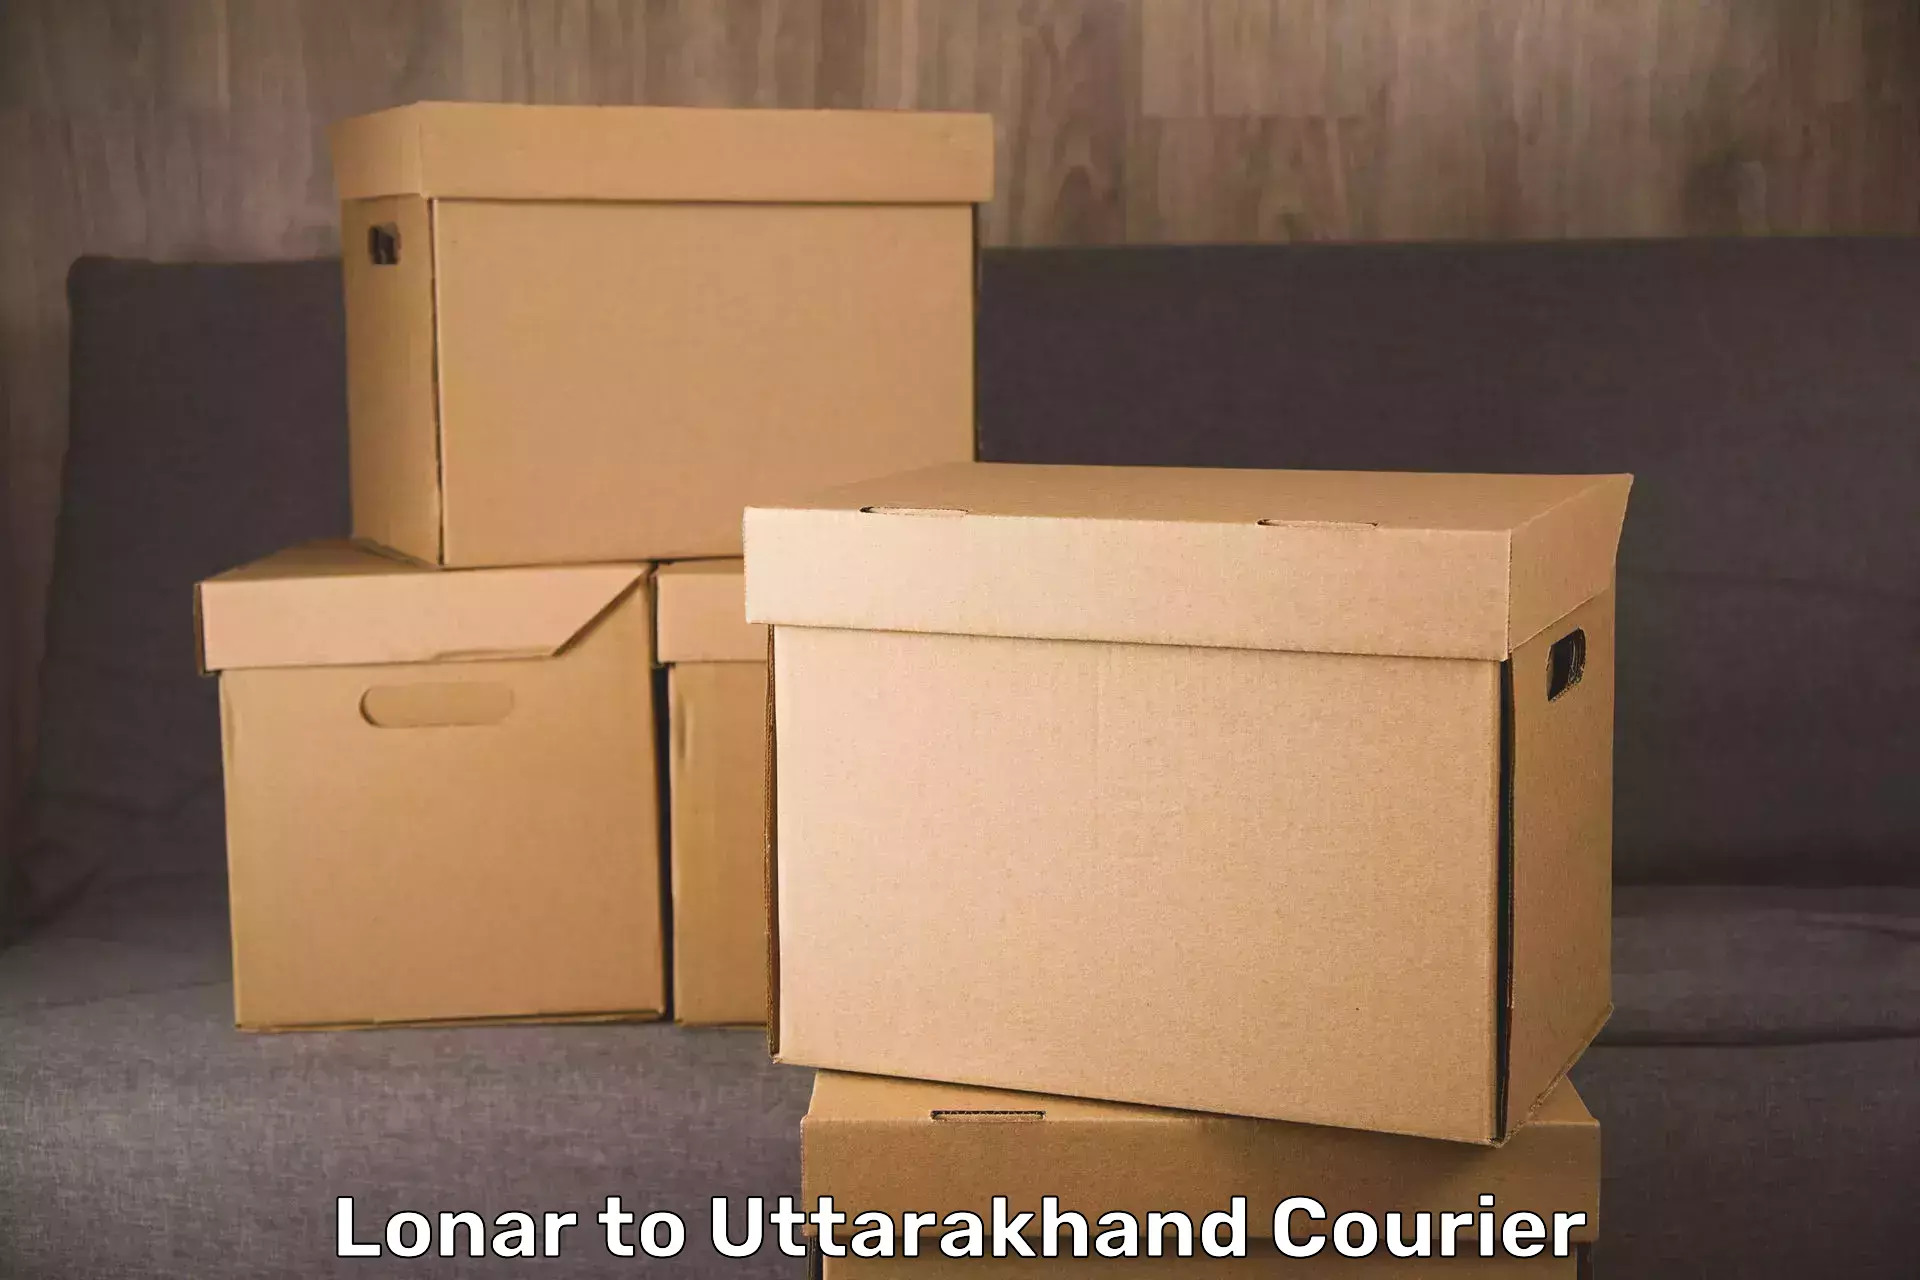 Luggage shipment tracking Lonar to Mussoorie